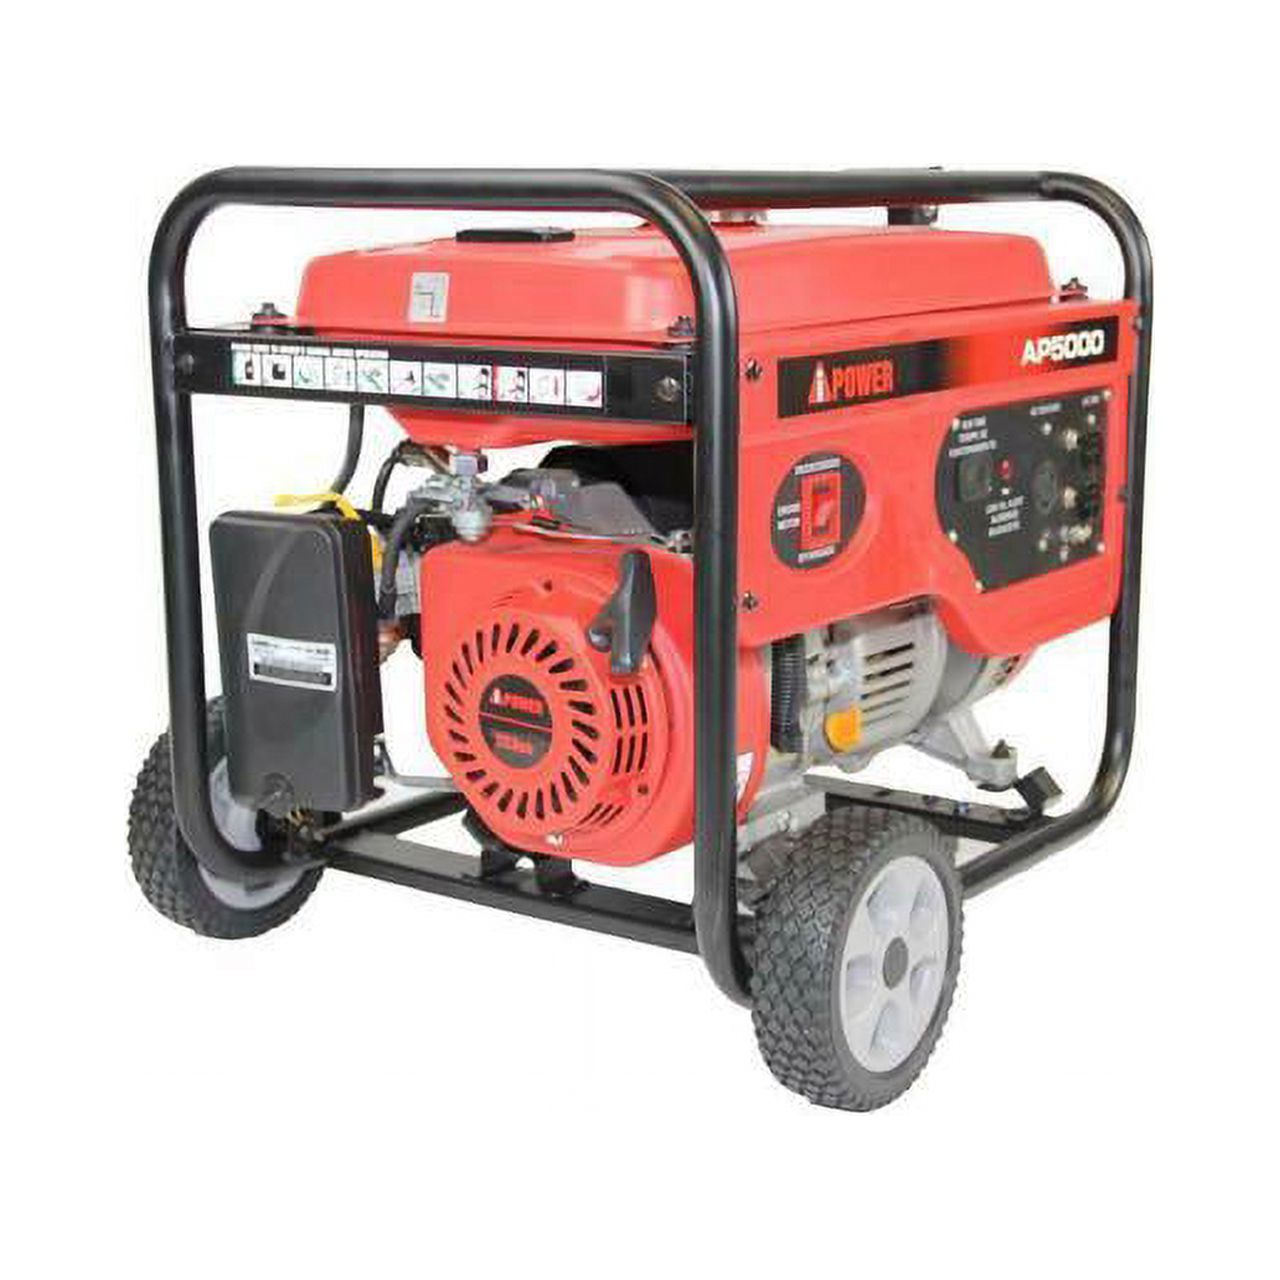 A-iPower AP5000 Gasoline Portable Generator W/ 5000W Starting Watts - image 3 of 5